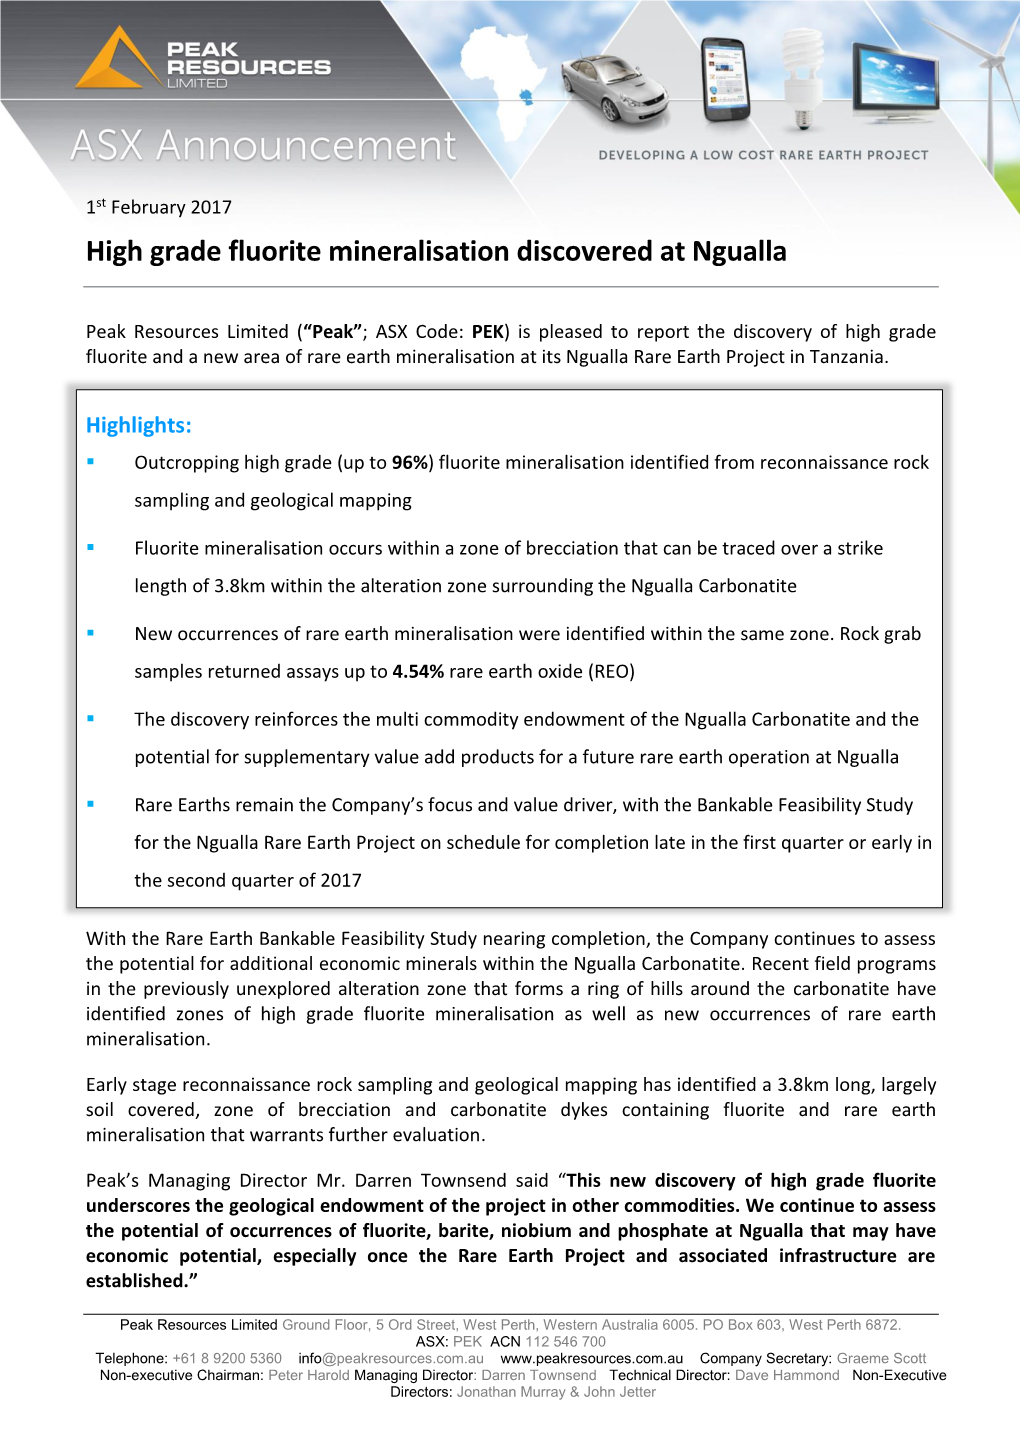 High Grade Fluorite Mineralisation Discovered at Ngualla